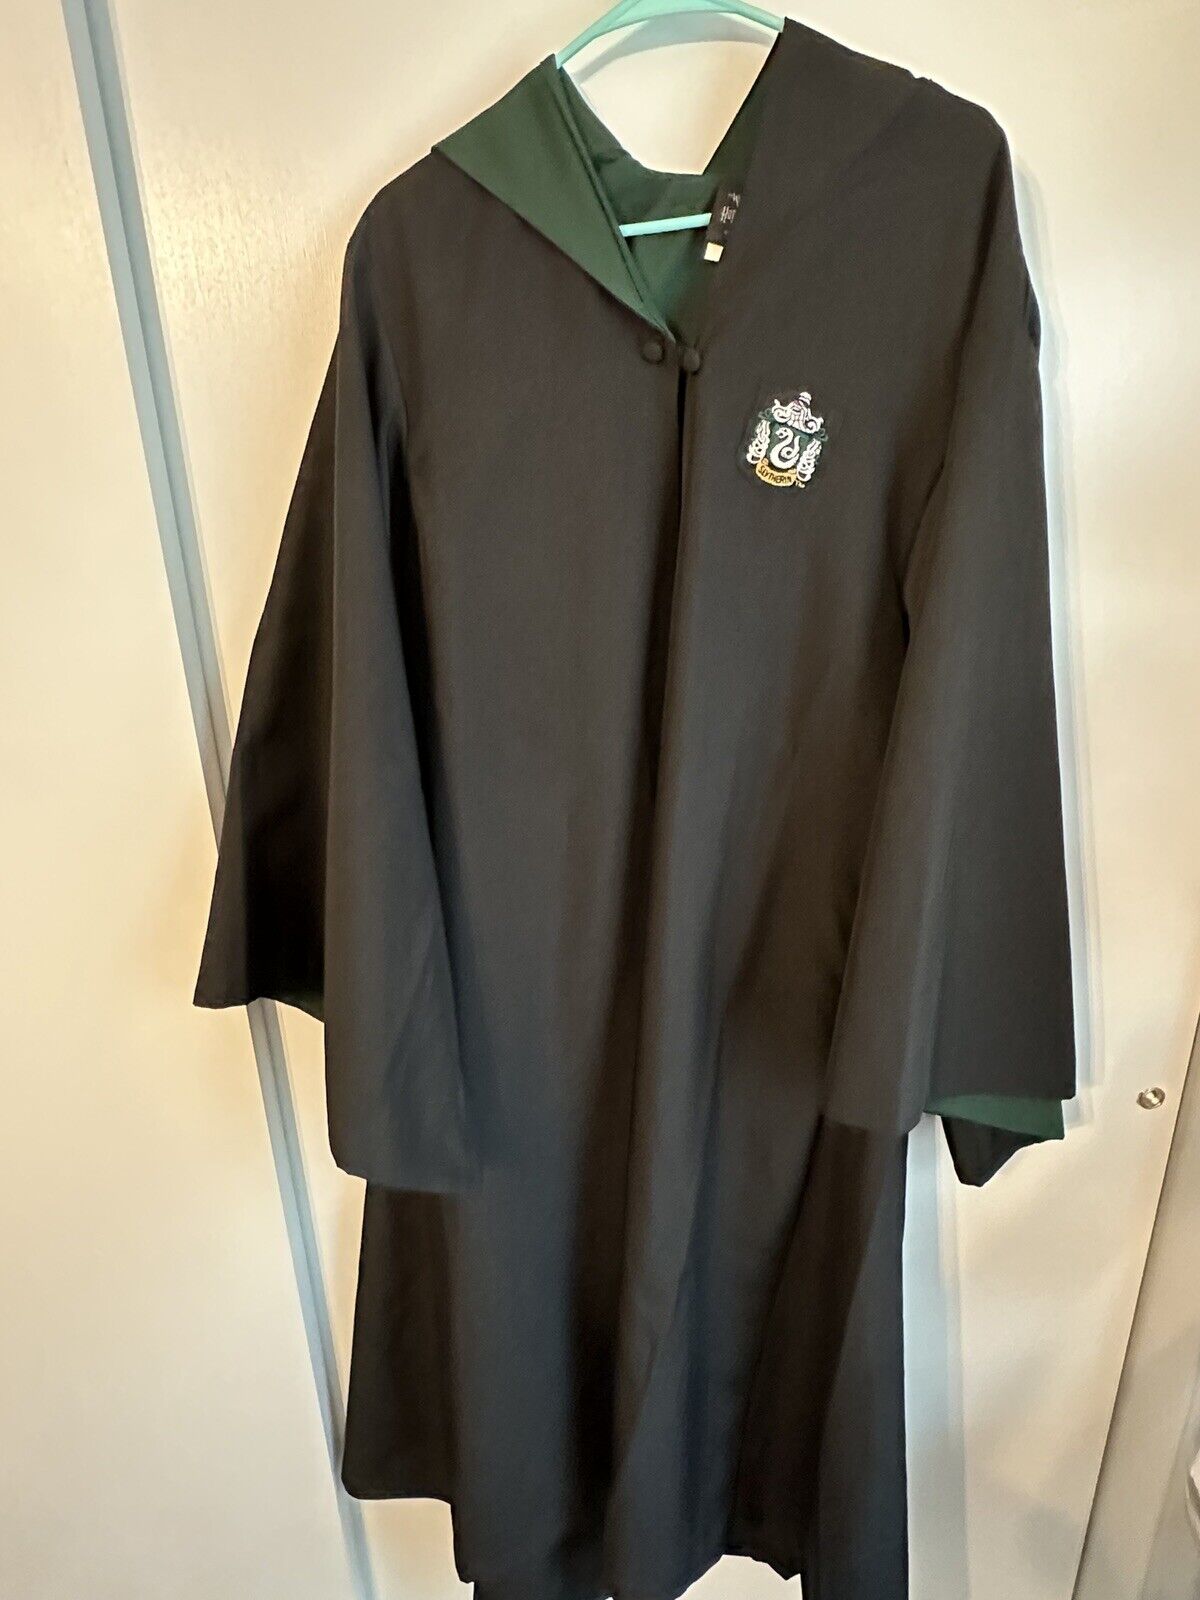 Official “The Wizarding World Of Harry Potter” Slytherin House Robe, Size Medium